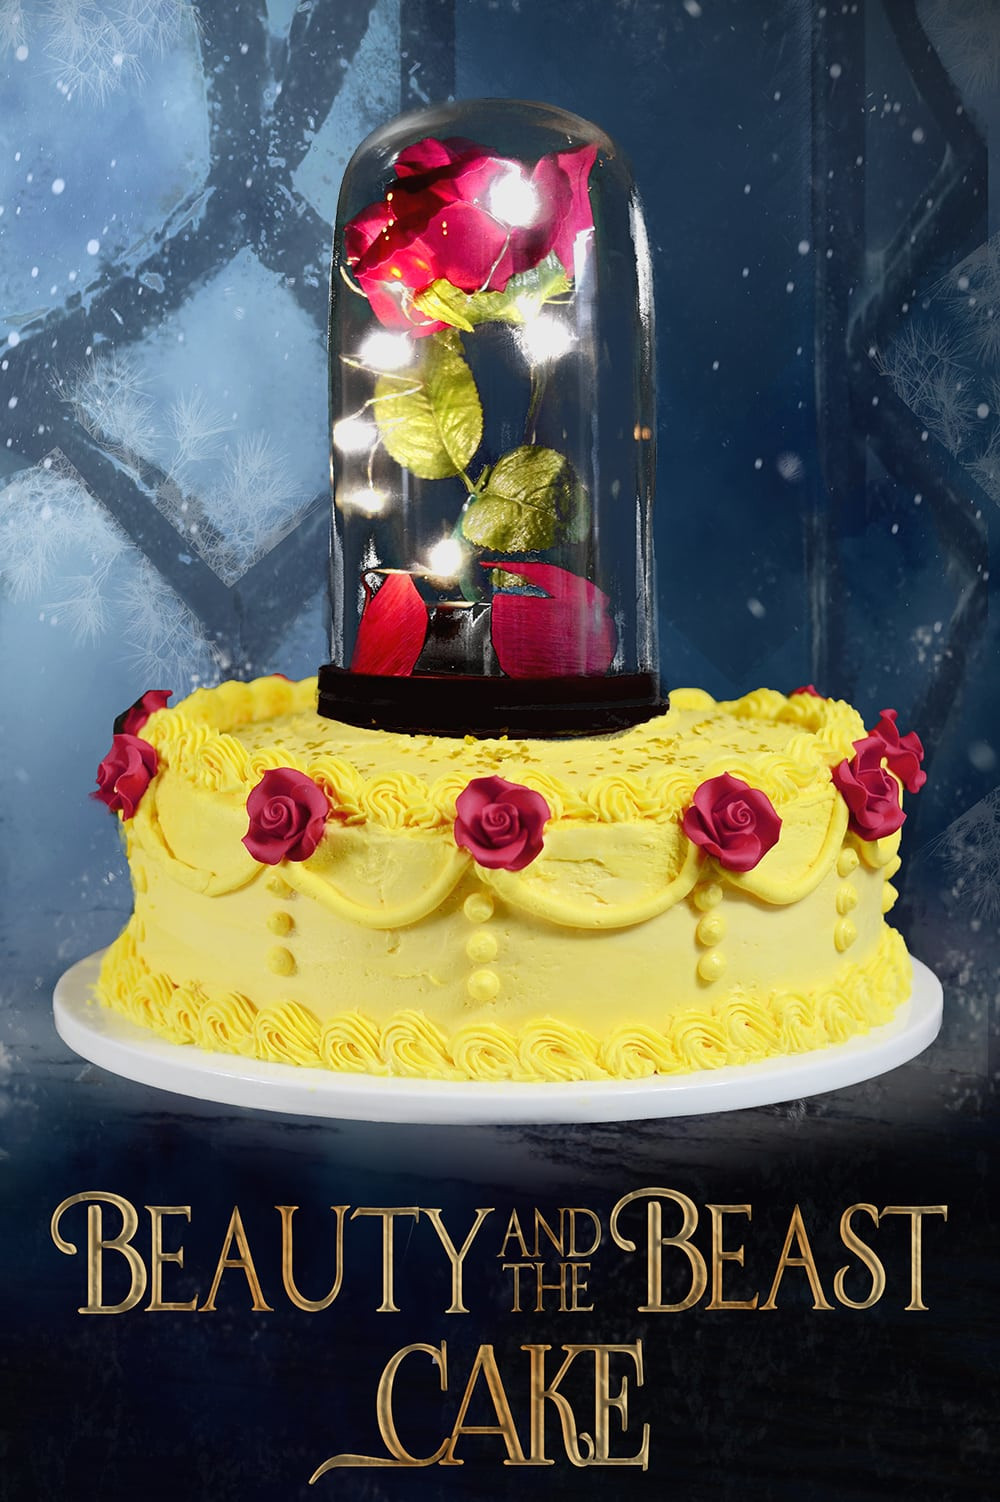 Beauty and the Beast Birthday Cake Awesome Beauty and the Beast Cake Video Tutorial ⋆ Sprinkle some Fun